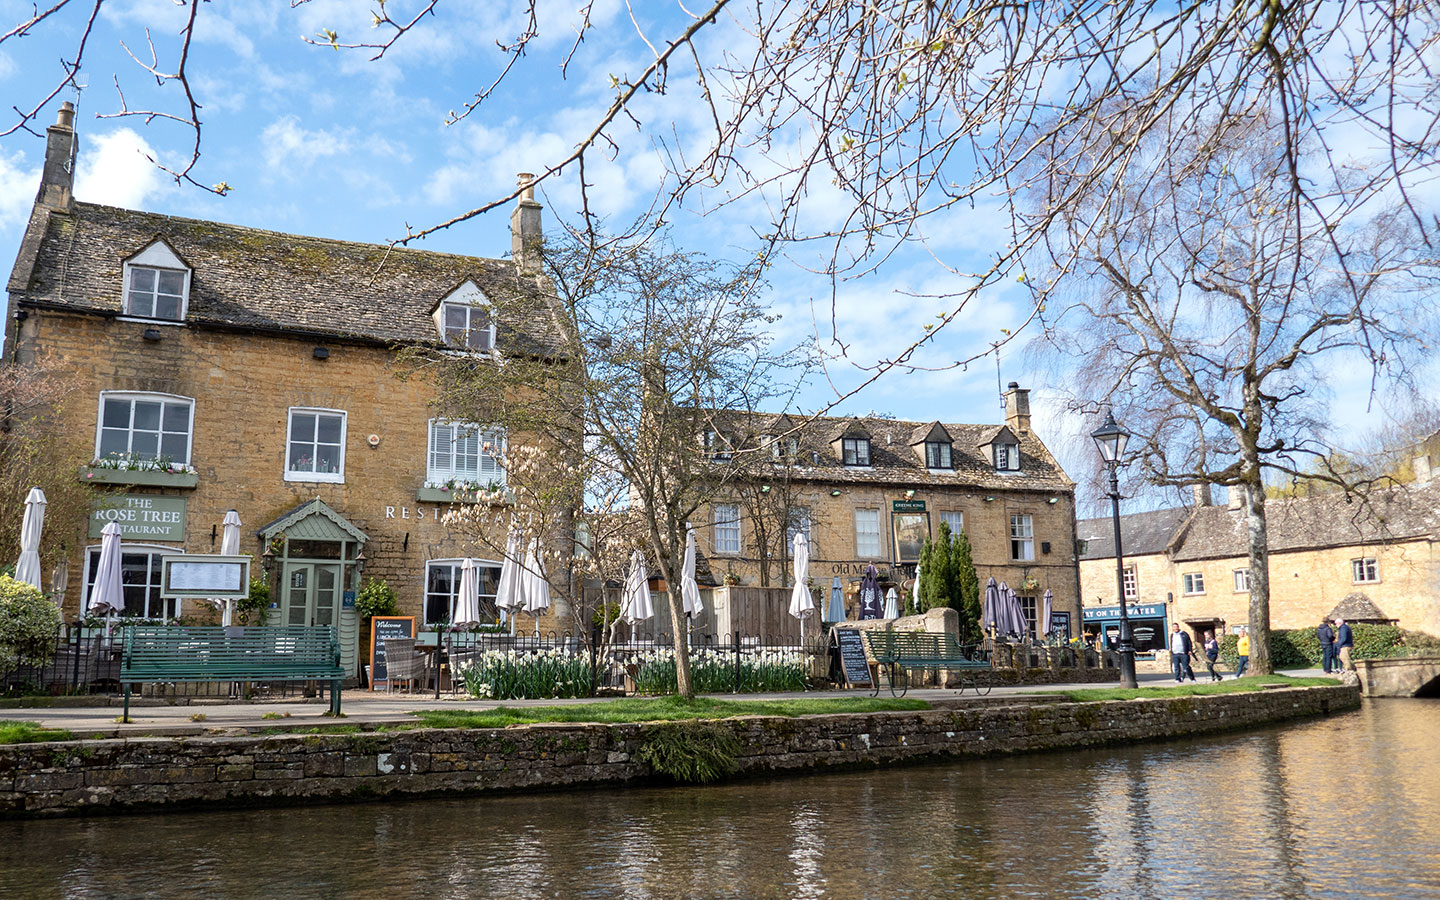 Where to stay in the Cotswolds without a car – Bourton-on-the-Water